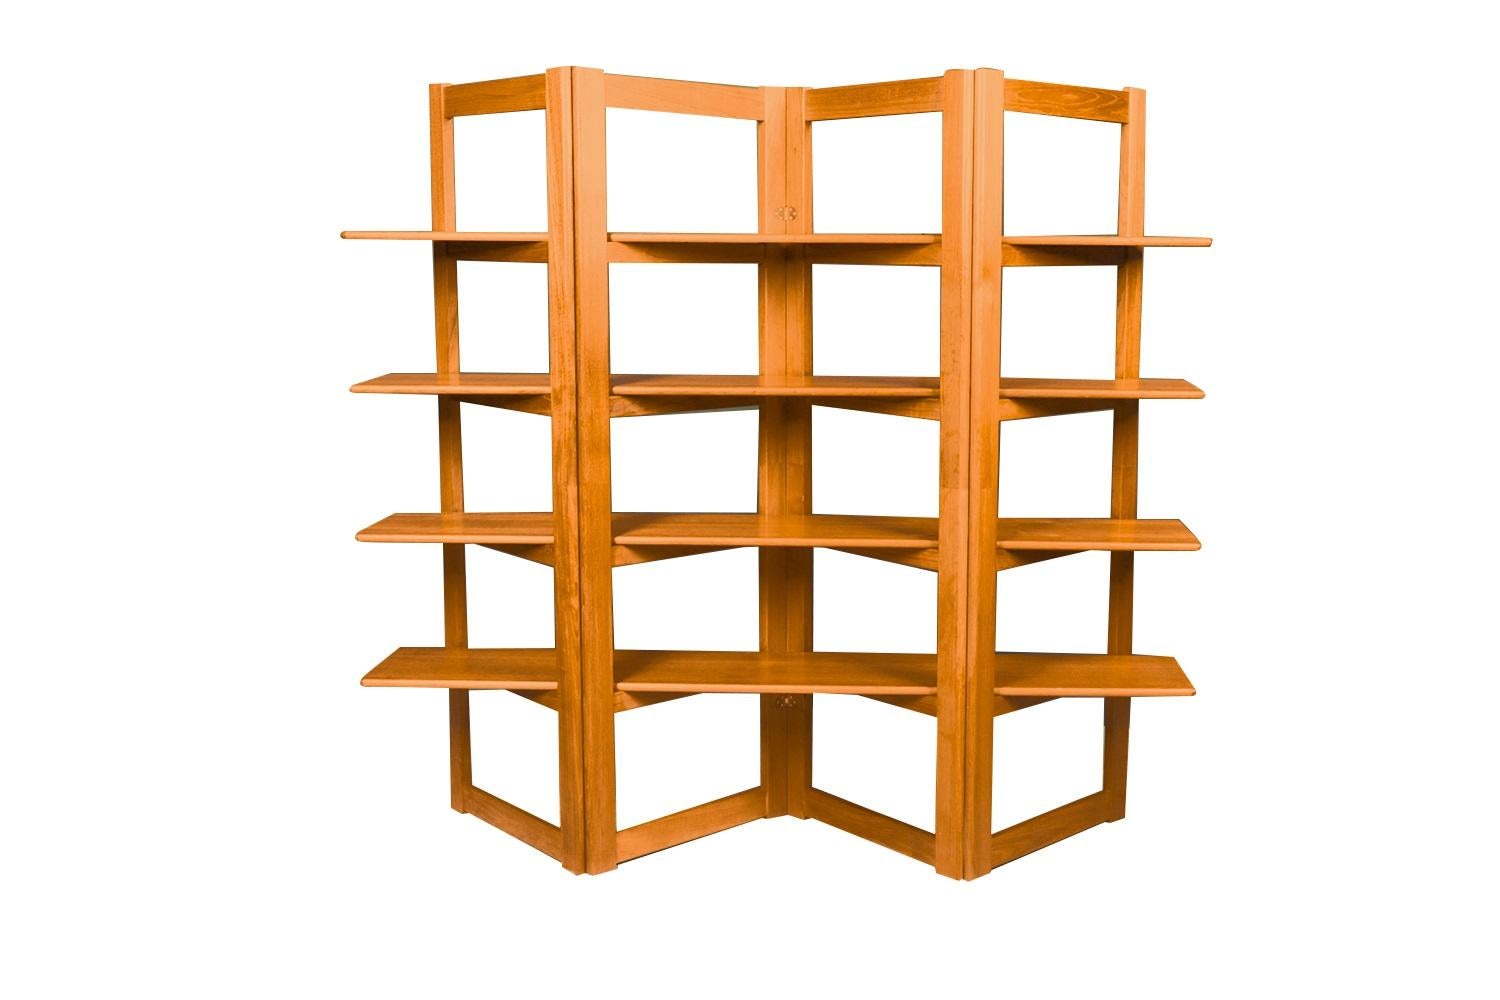 A remarkable 4 shelf bi-fold Mid-Century Modern, freestanding, Room Divider /open Bookcase, in nearly pristine condition. Manufacture By Sun wood Industries by KD Furniture. Lovely double-sided teak tones and grain on both sides in a beautiful rich